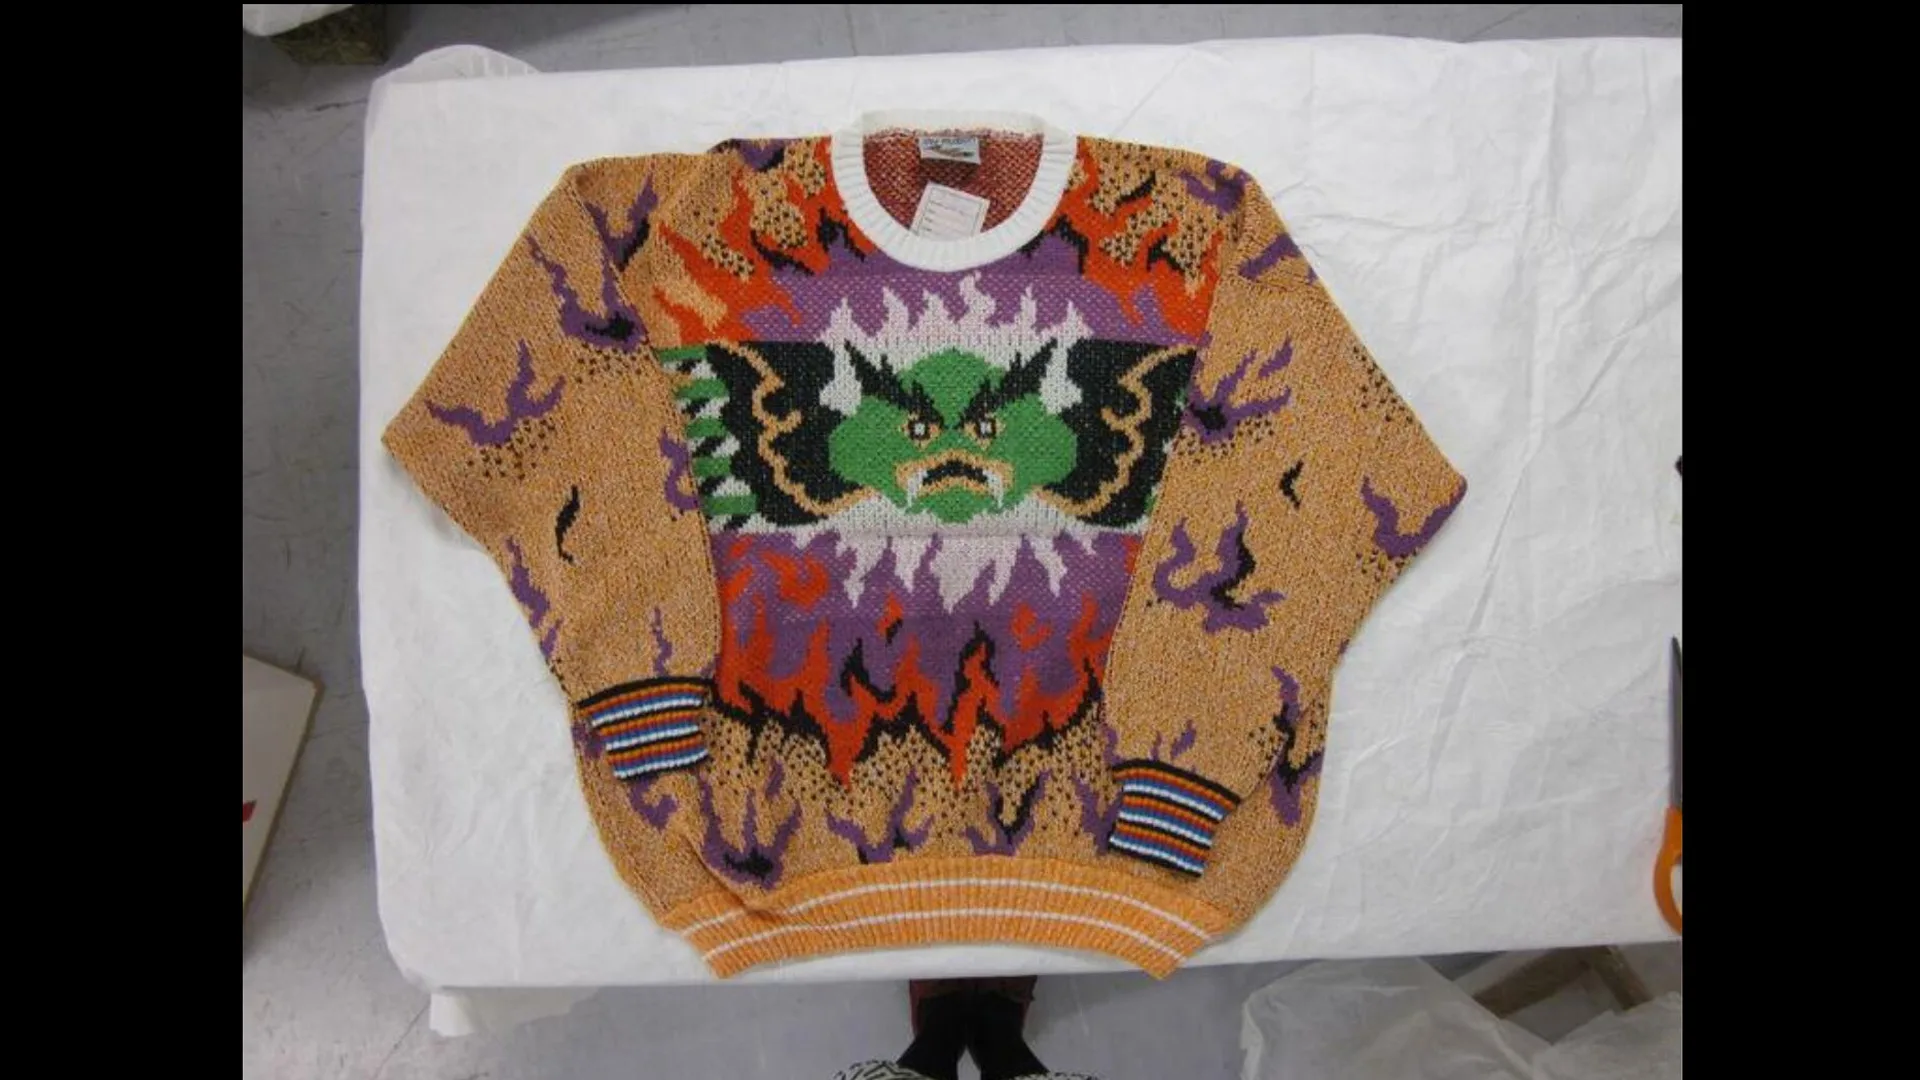 Photograph of a knitted jumper with an angry dragon design